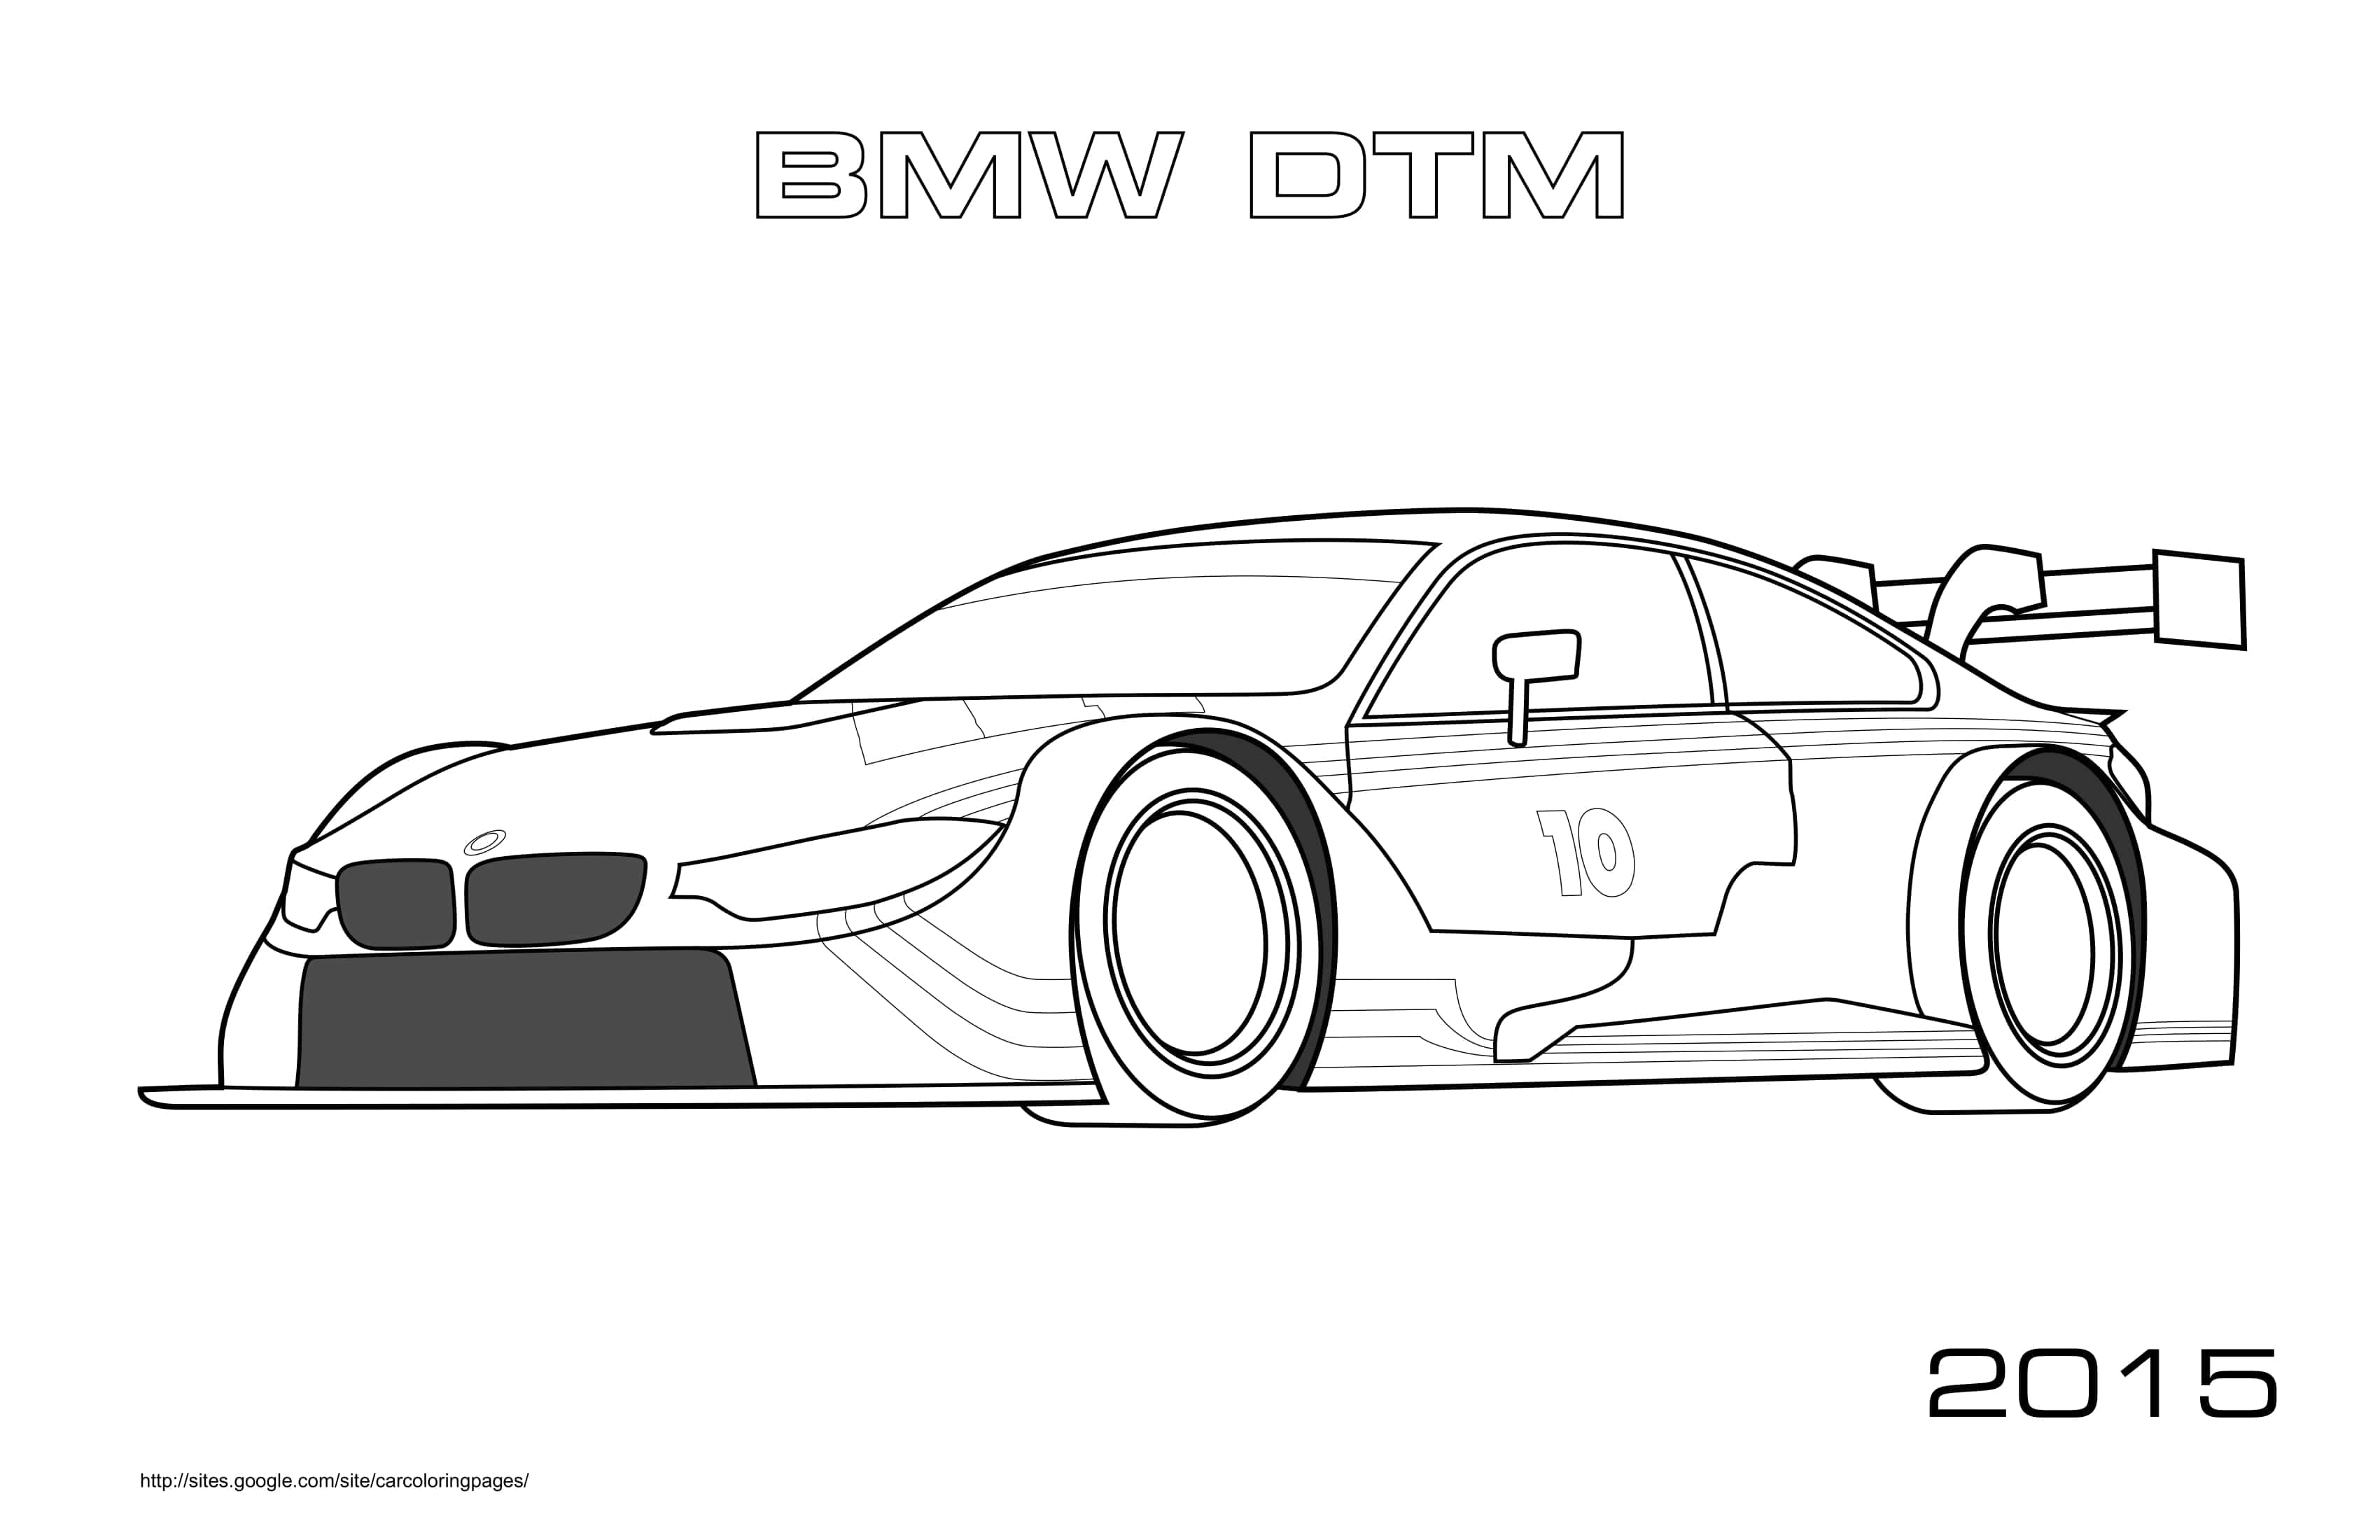 Bmw Dtm 2015 Coloring Page